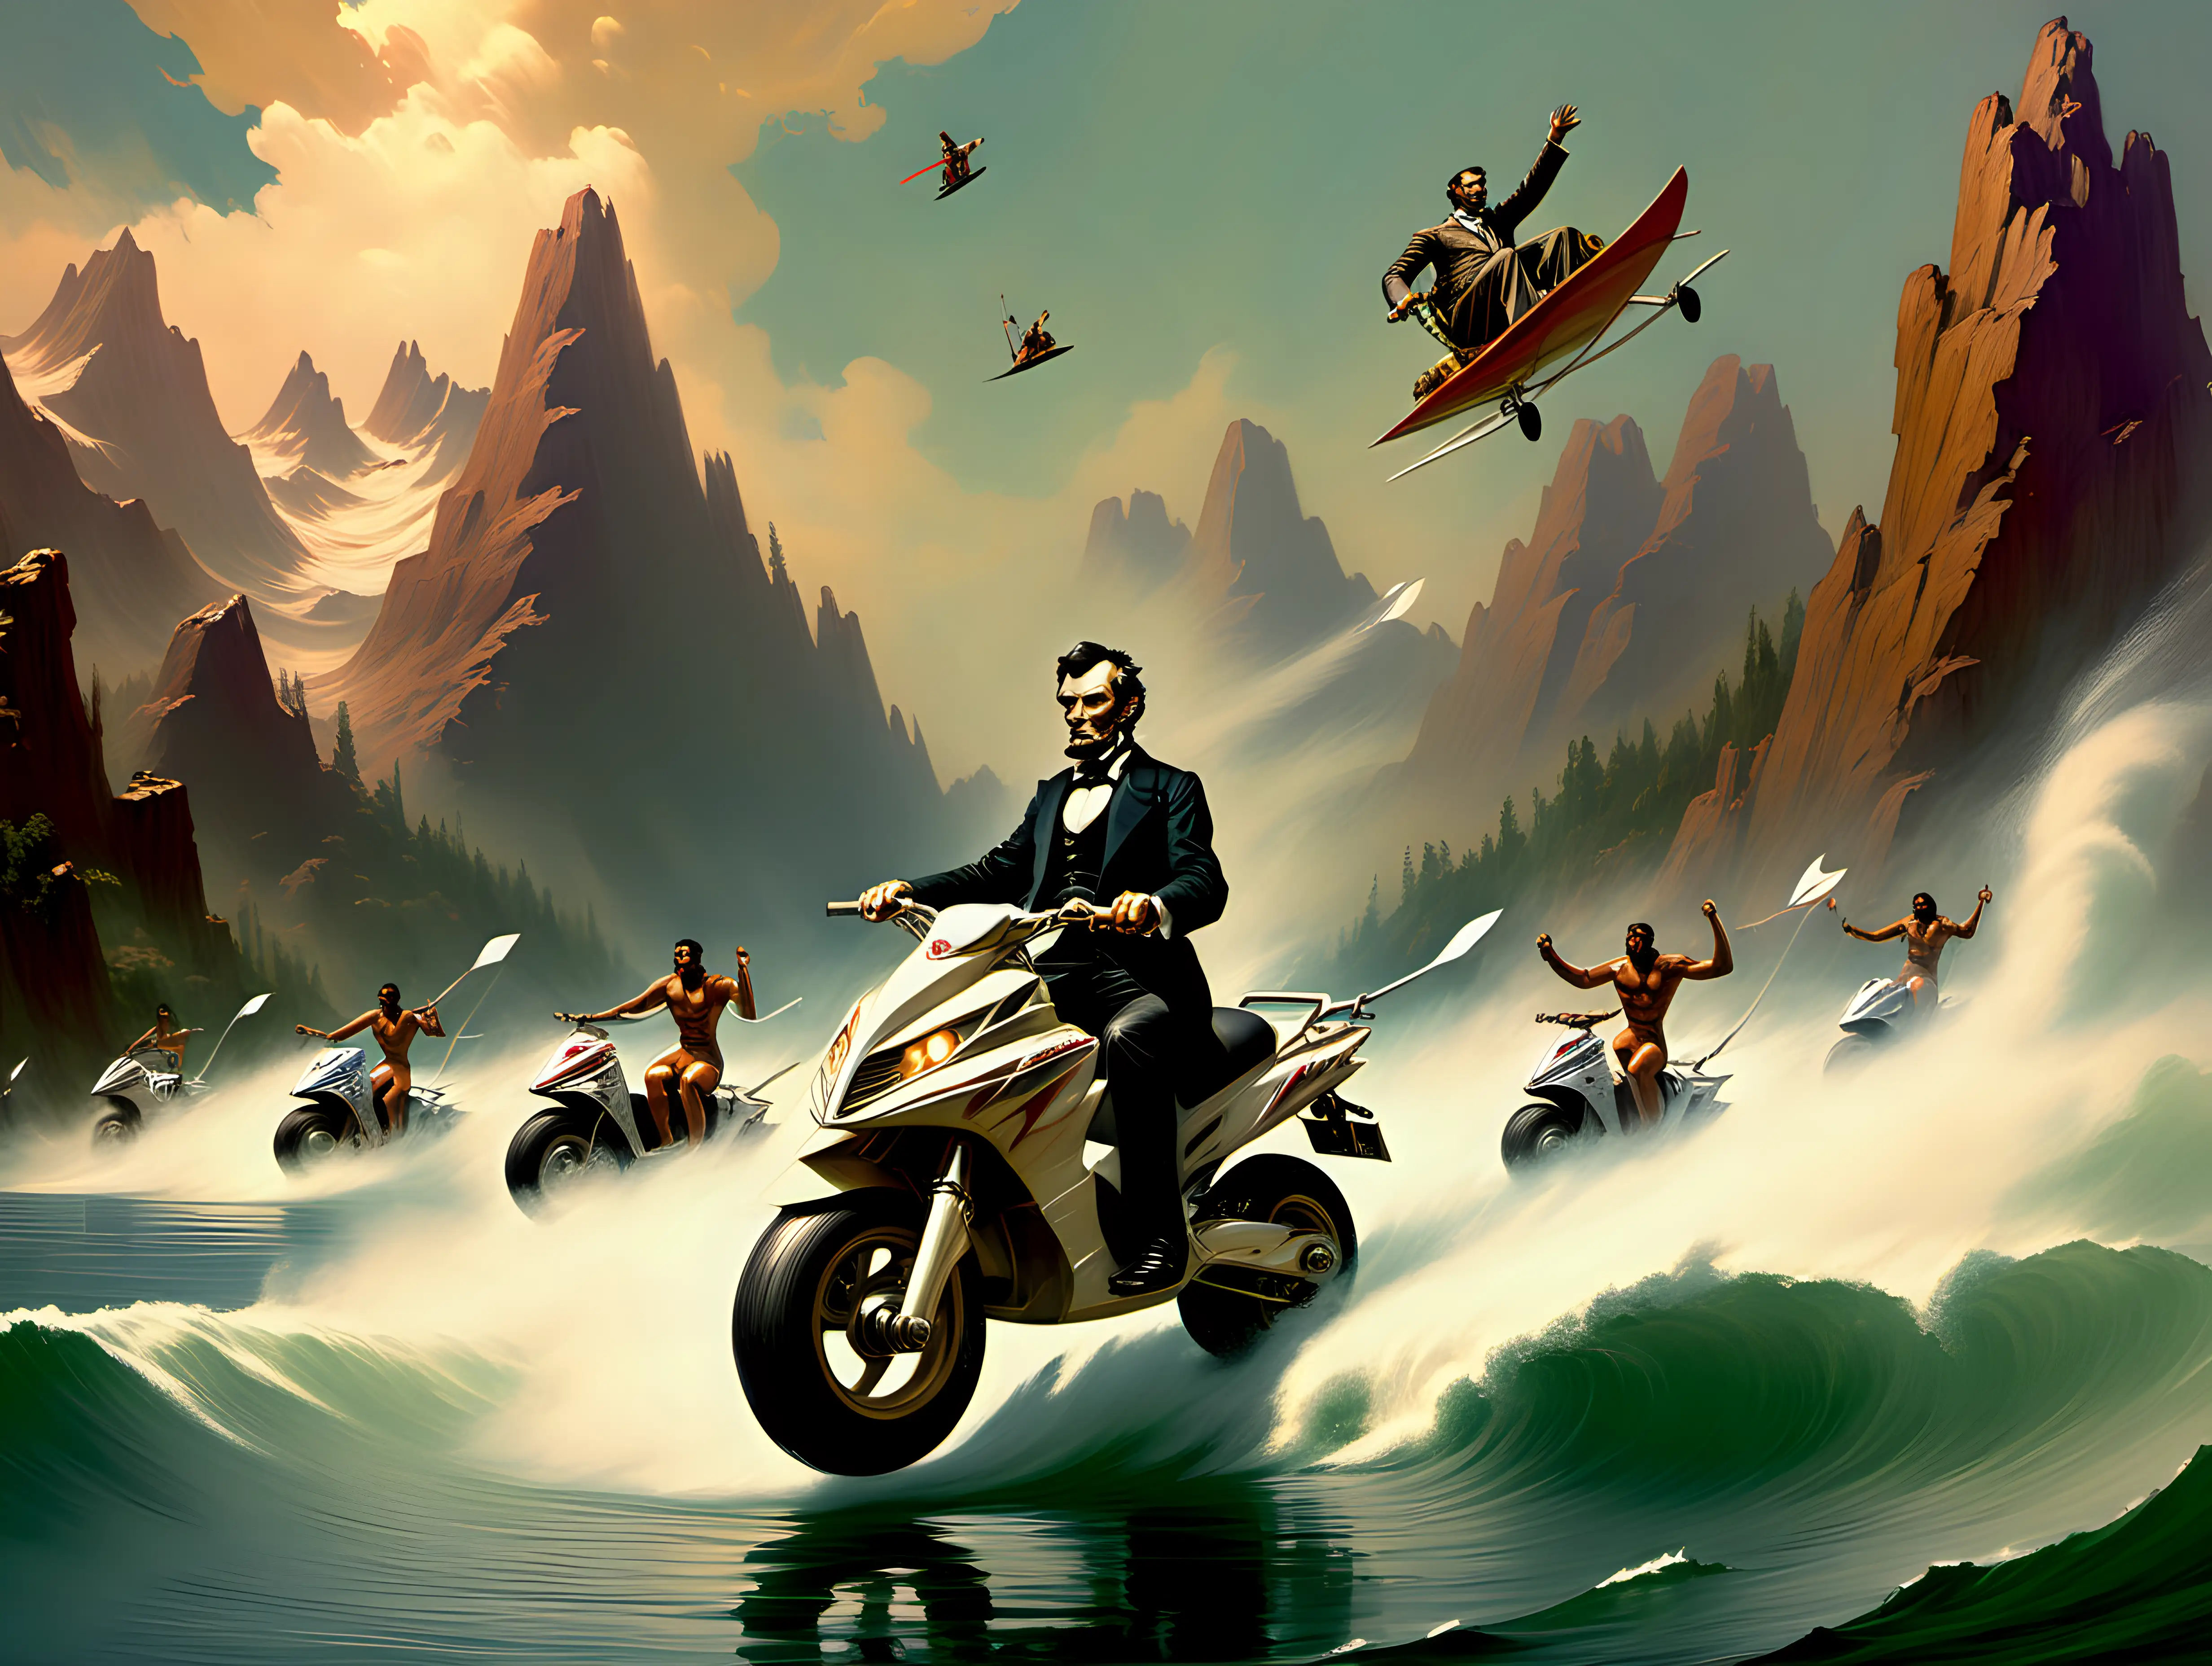 Abraham Lincoln riding a jet sky on a lake chased by wind surfing ogres surrounded by giant mountains Frank Frazetta style